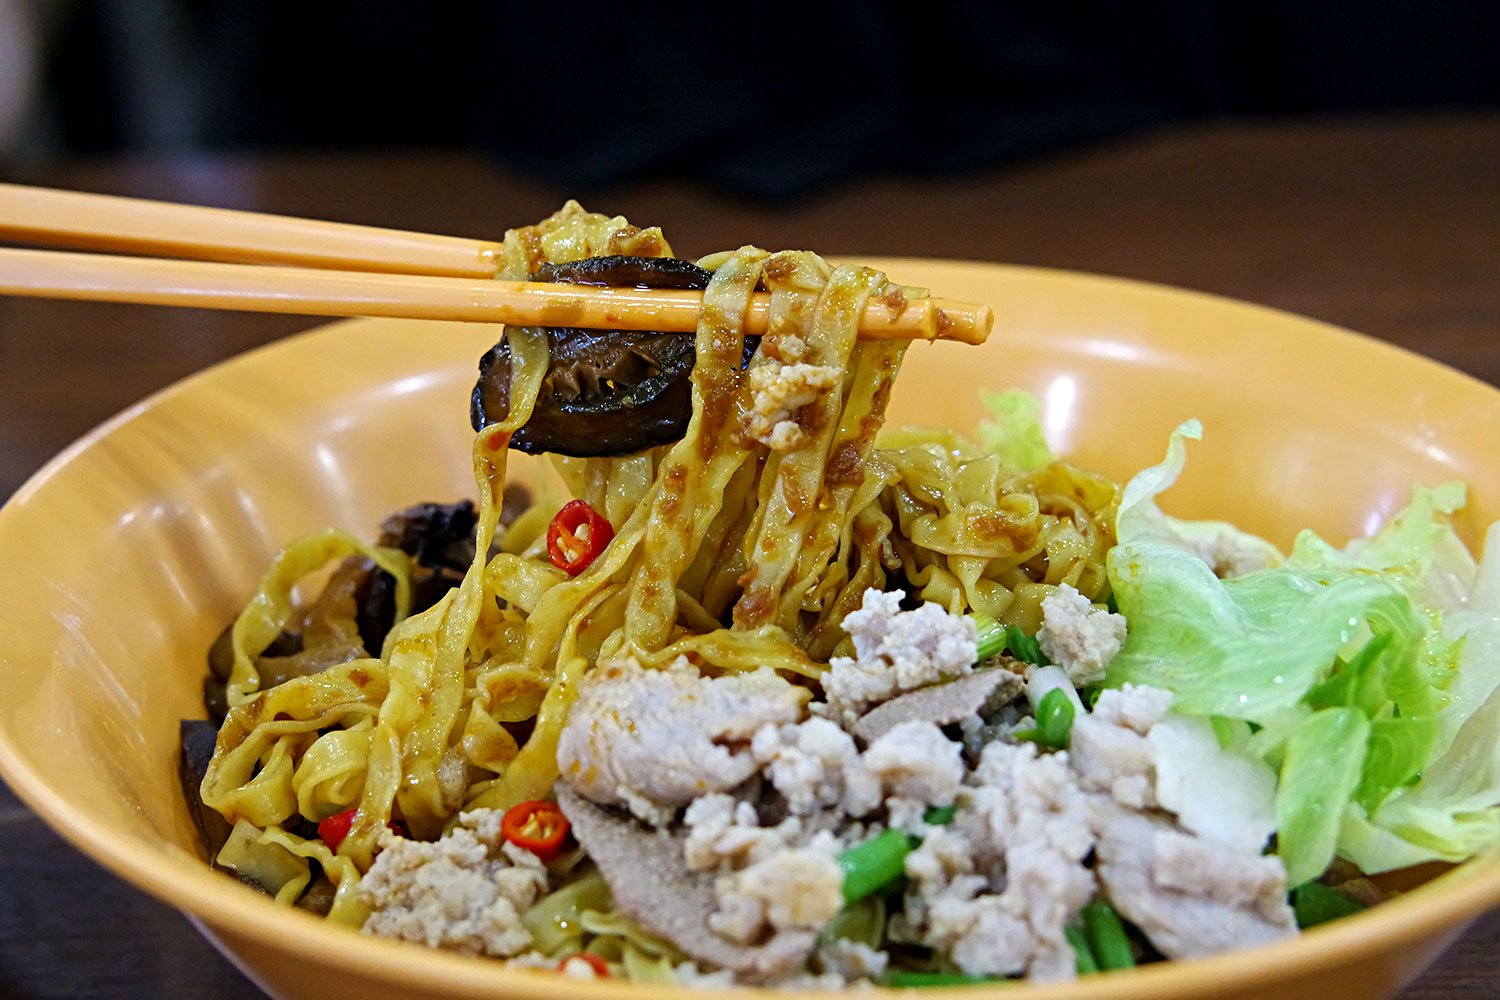 Thin egg noodles are tossed in with a house made chilli sauce, cooked pork mince, braised mushrooms, and generous lashings of vinegar